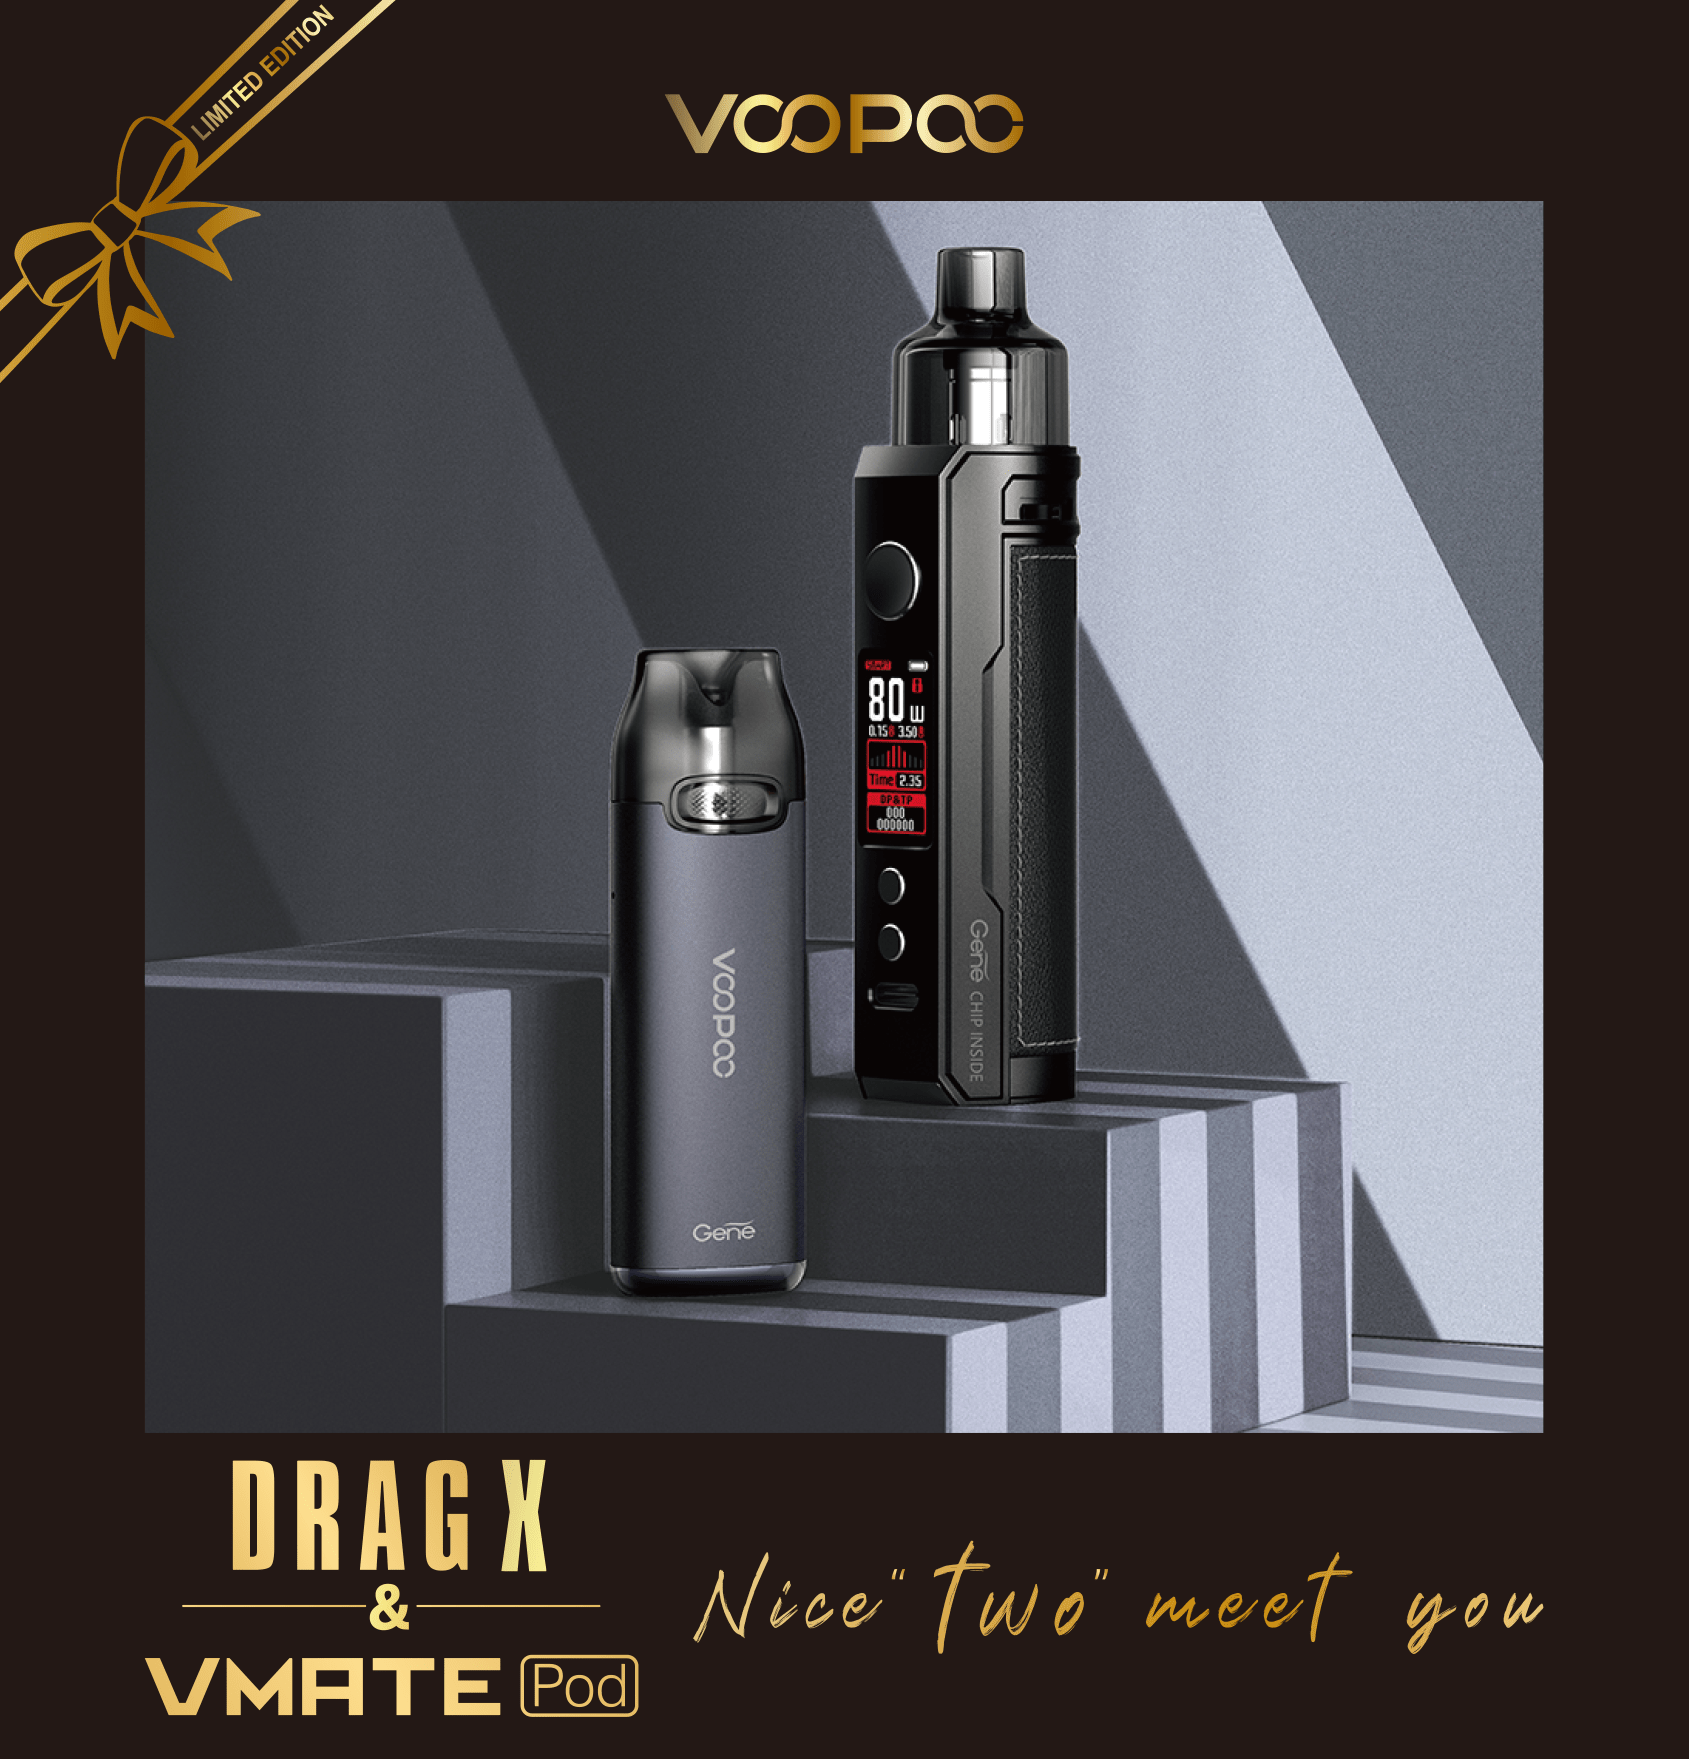 Limited Edition Drag X & VMATE Pod Box Set - VOOPOO